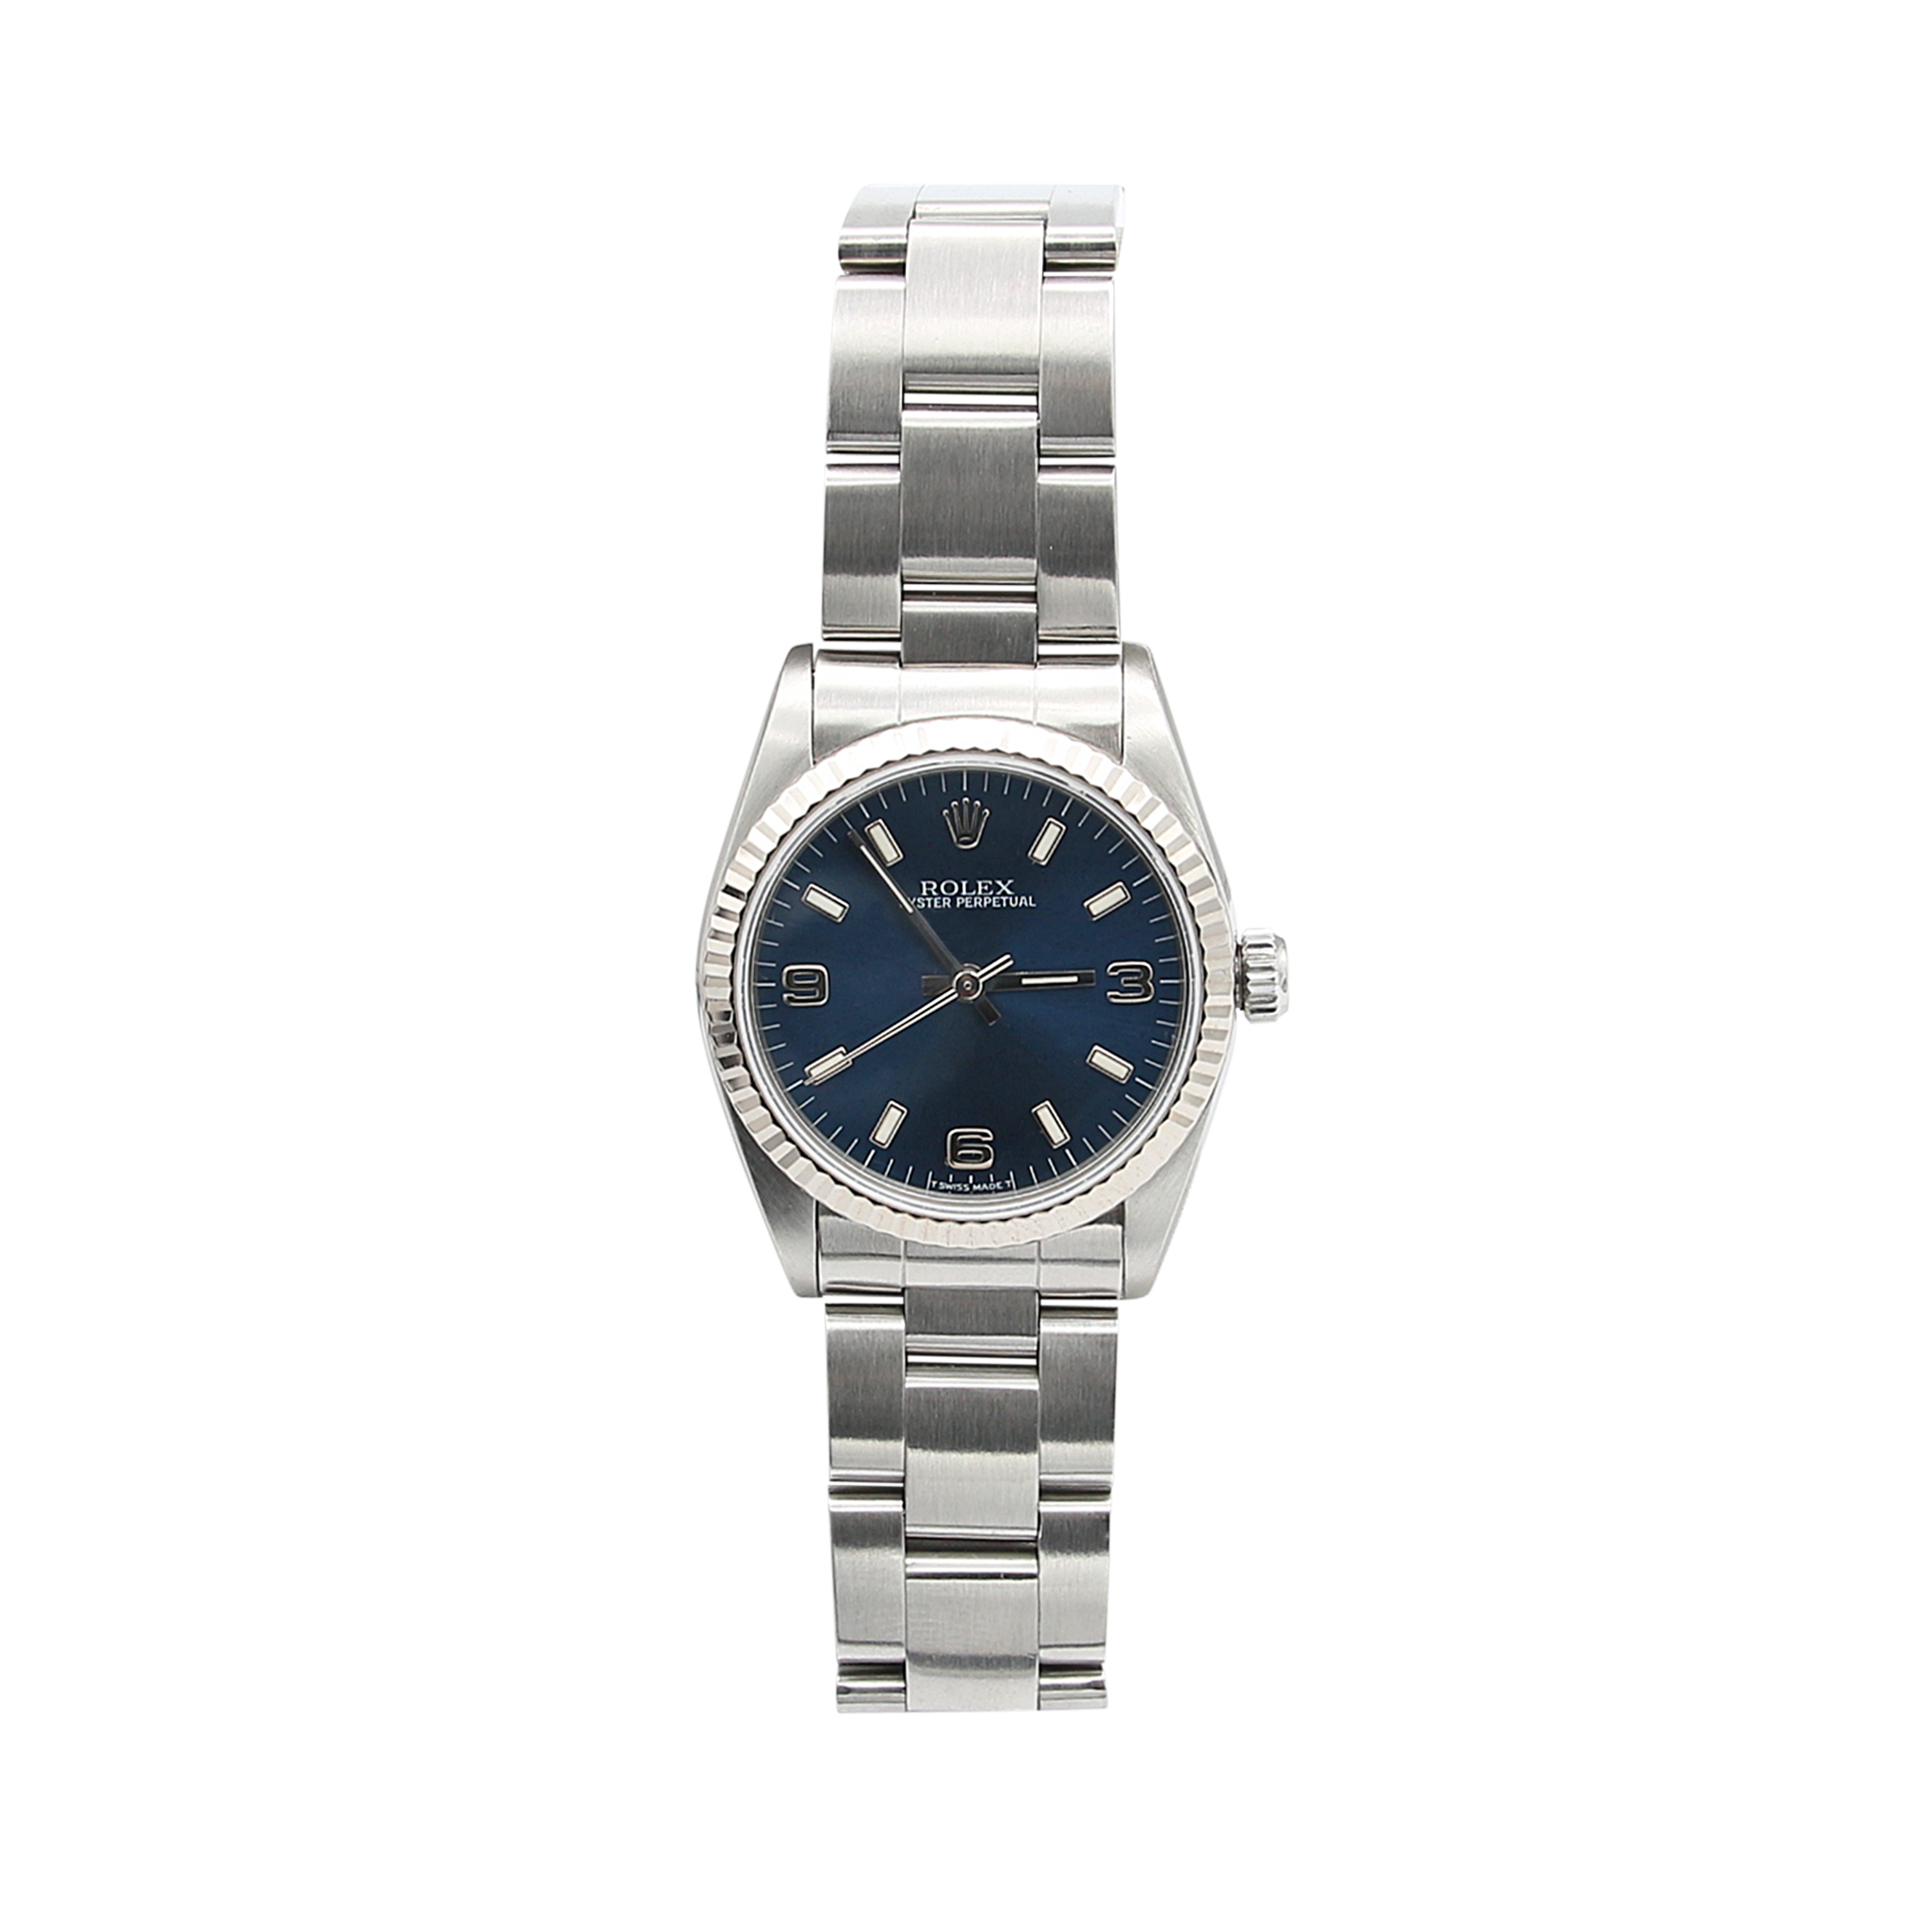 Rolex Oyster perpetual 67514 Blue Dial Oyster bracelet